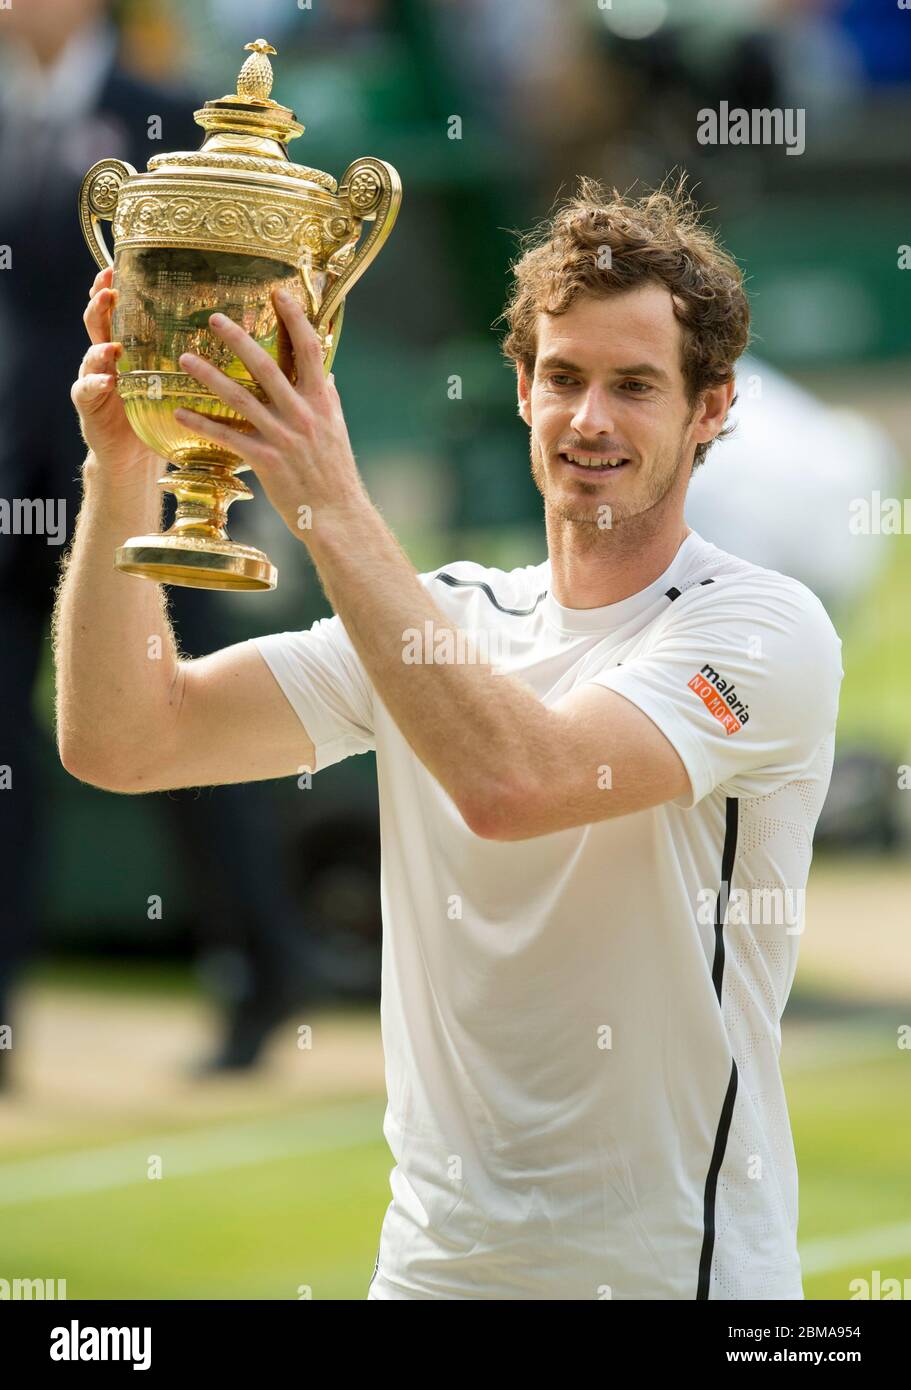 10th July, 2016, Wimbledon, London: Mens Singles Final, Centre Court, Andy Murray holds the Wimbledon trophy after defeating Canada's Milos Raonic. Stock Photo